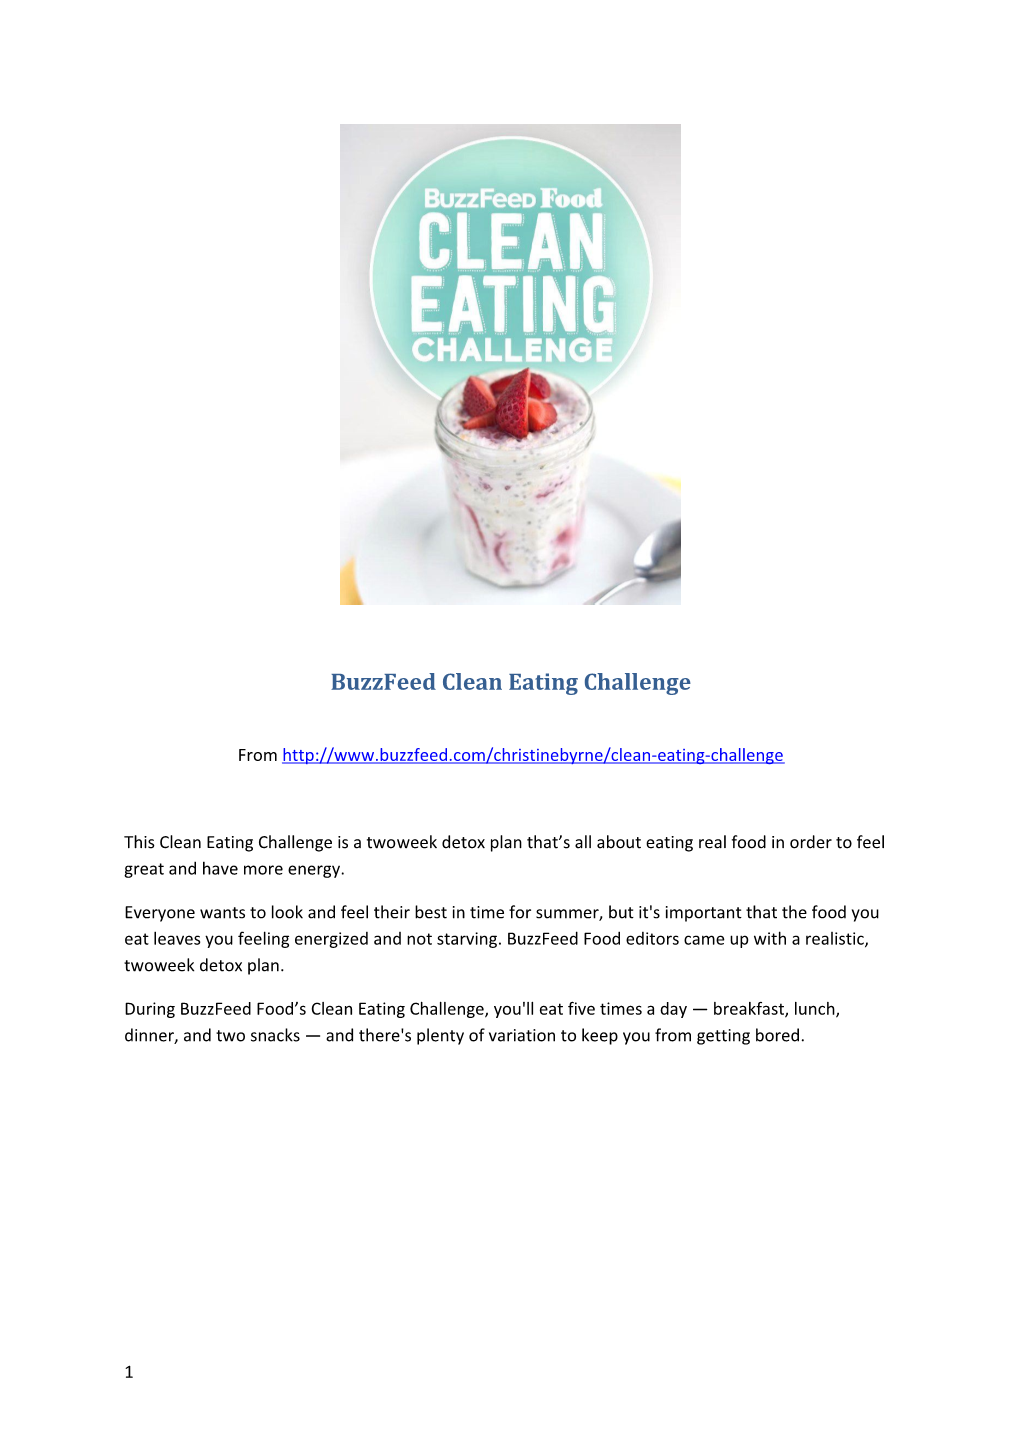 Buzzfeed Clean Eating Challenge